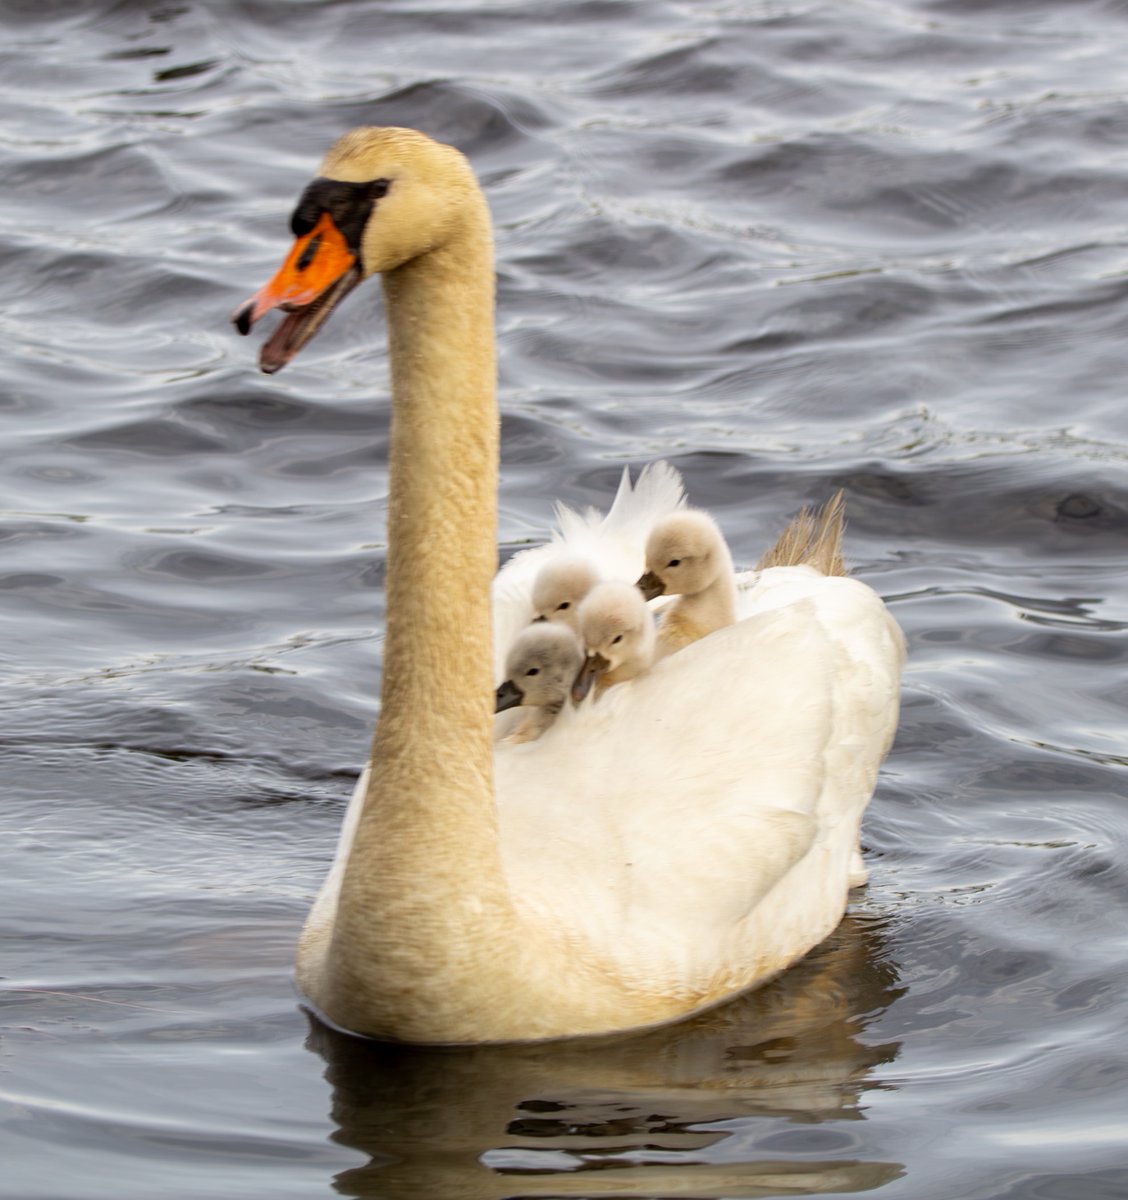 All aboard!  

Week old cygnets go for a ride on mom.  The other 4 still in the water. I’m an amateur photographer and would love this to go viral. Please share. 
@MassAudubon @audubonsociety @7News @WCVB @AMAZlNGNATURE @NatGeoPhotos @natgeowild @OutdoorPhotoMag @kellyclarkson